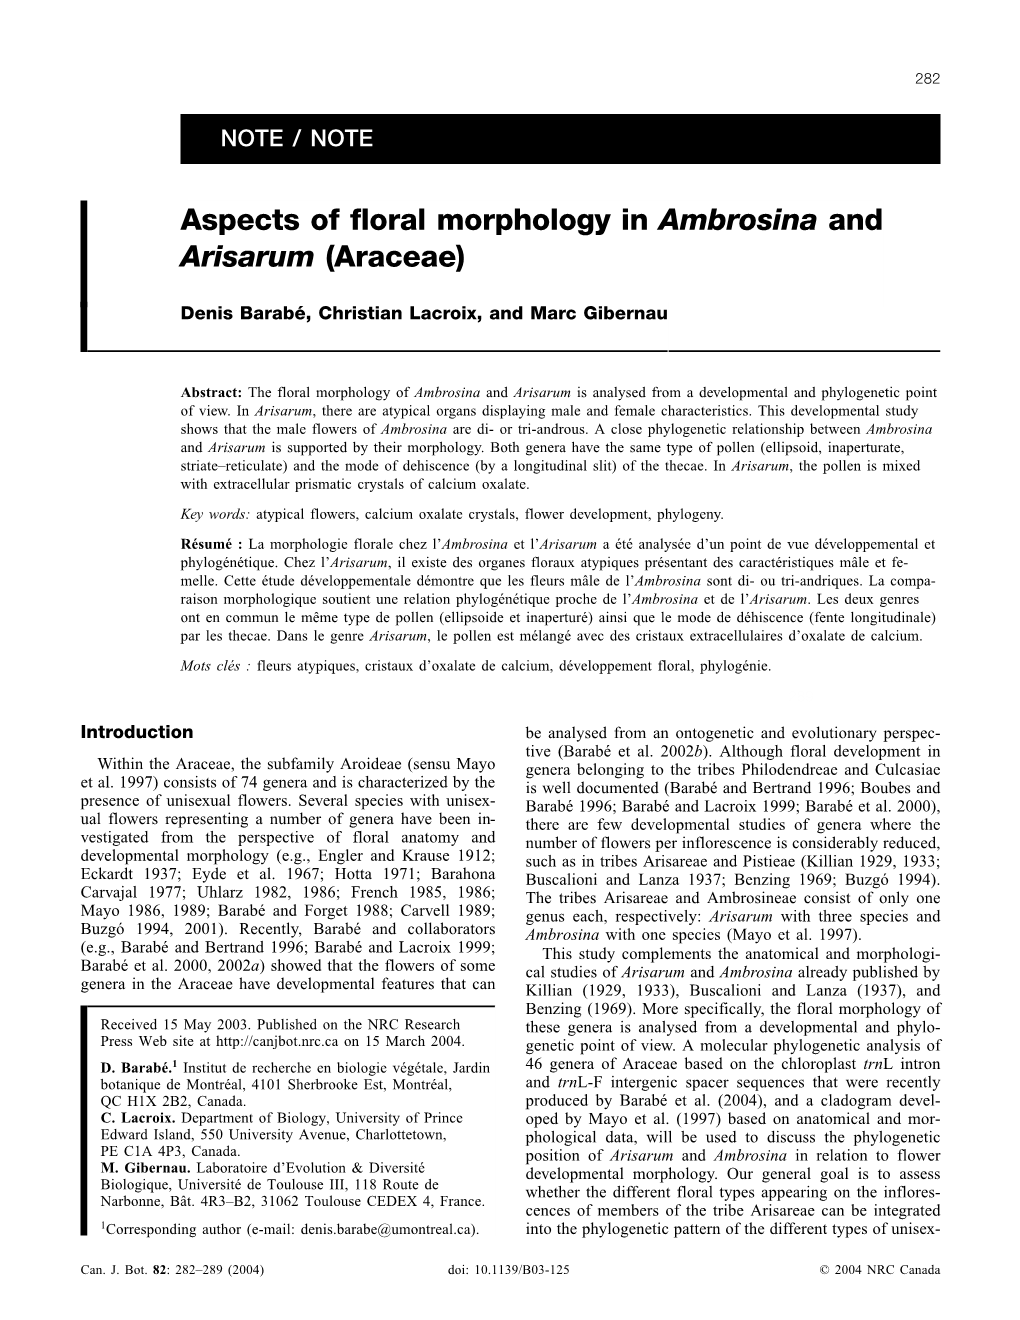 Aspects of Floral Morphology in Ambrosina and Arisarum (Araceae)